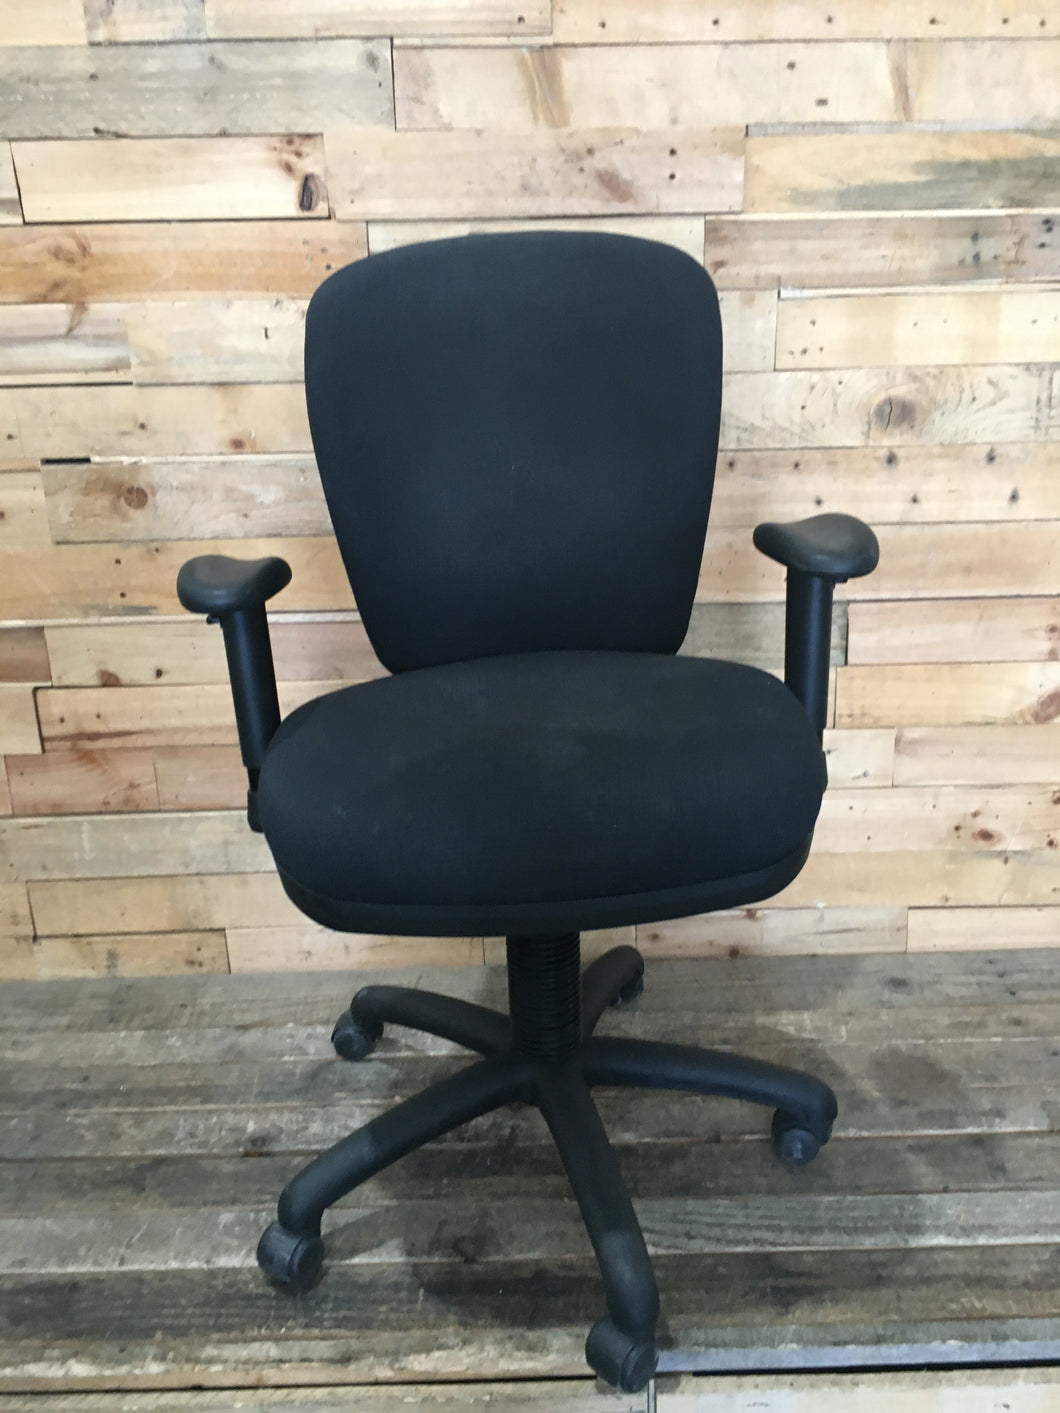 Ergonomic Black Office Chair with Armrests